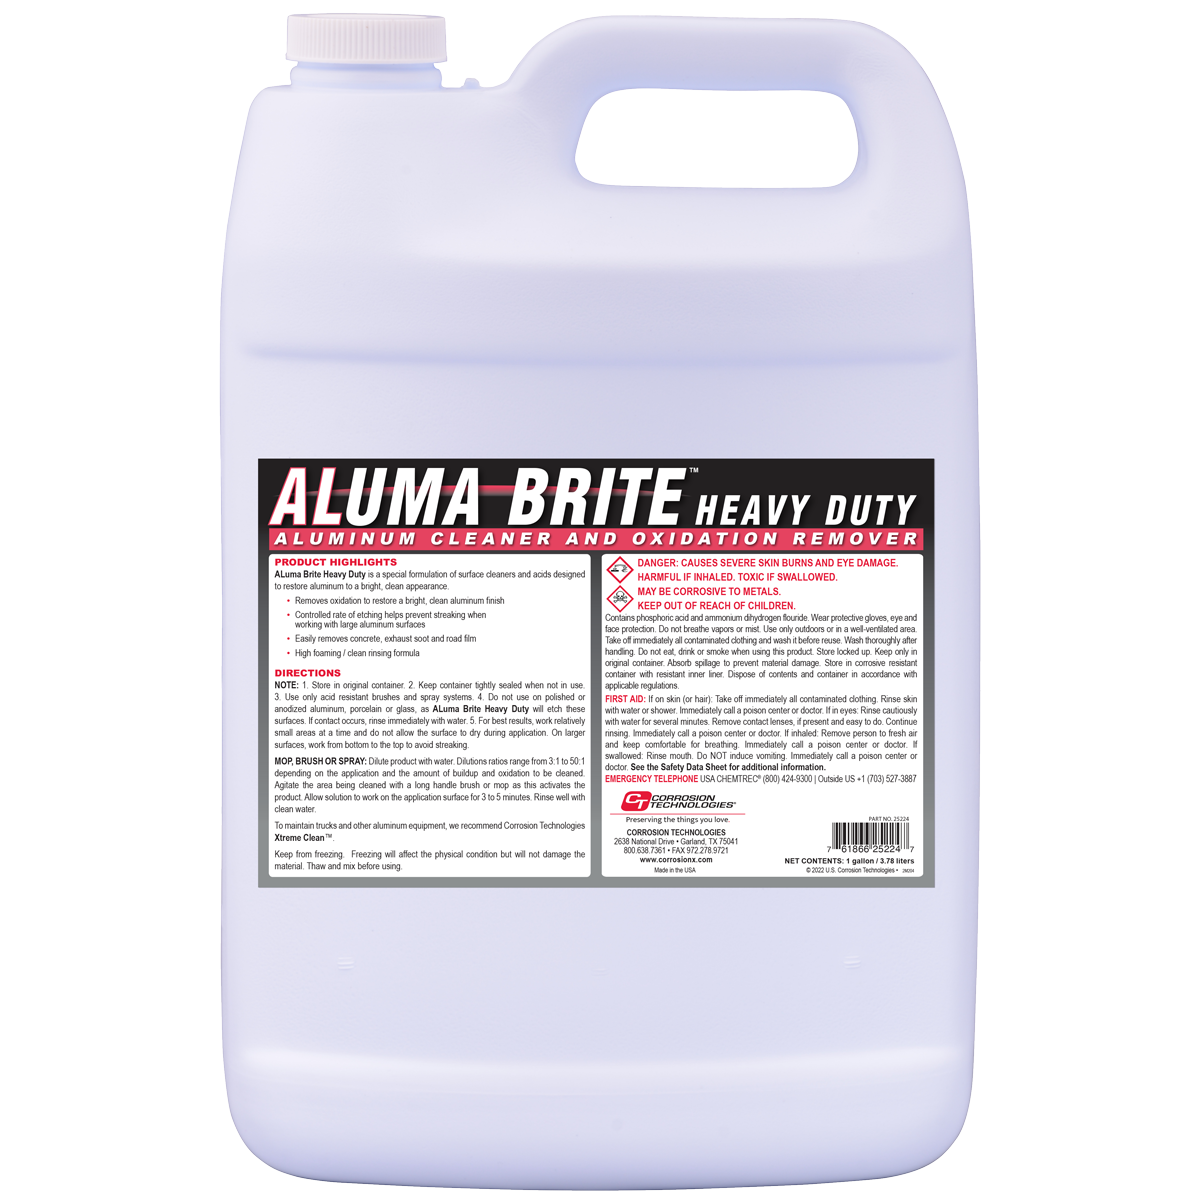 Buy Allbrite Wash & Wax for Your Car or Truck Allbrite Car Care Products